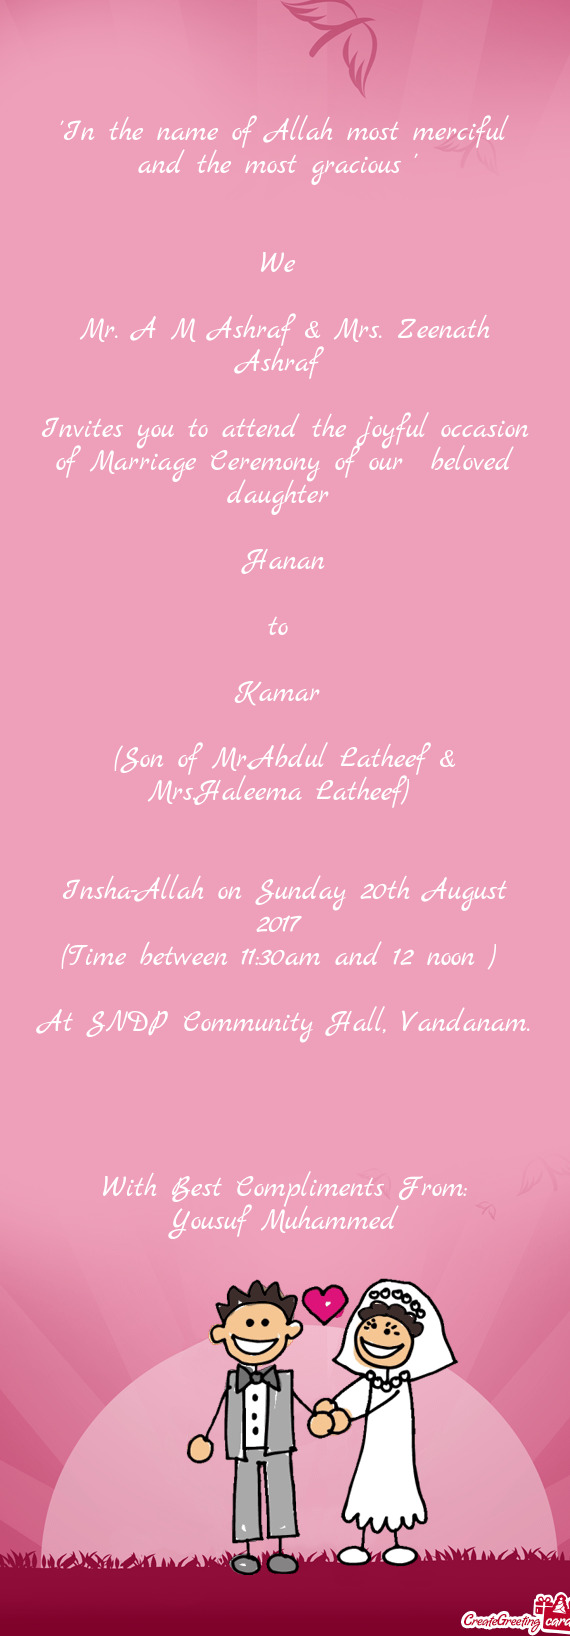 Invites you to attend the joyful occasion of Marriage Ceremony of our beloved daughter